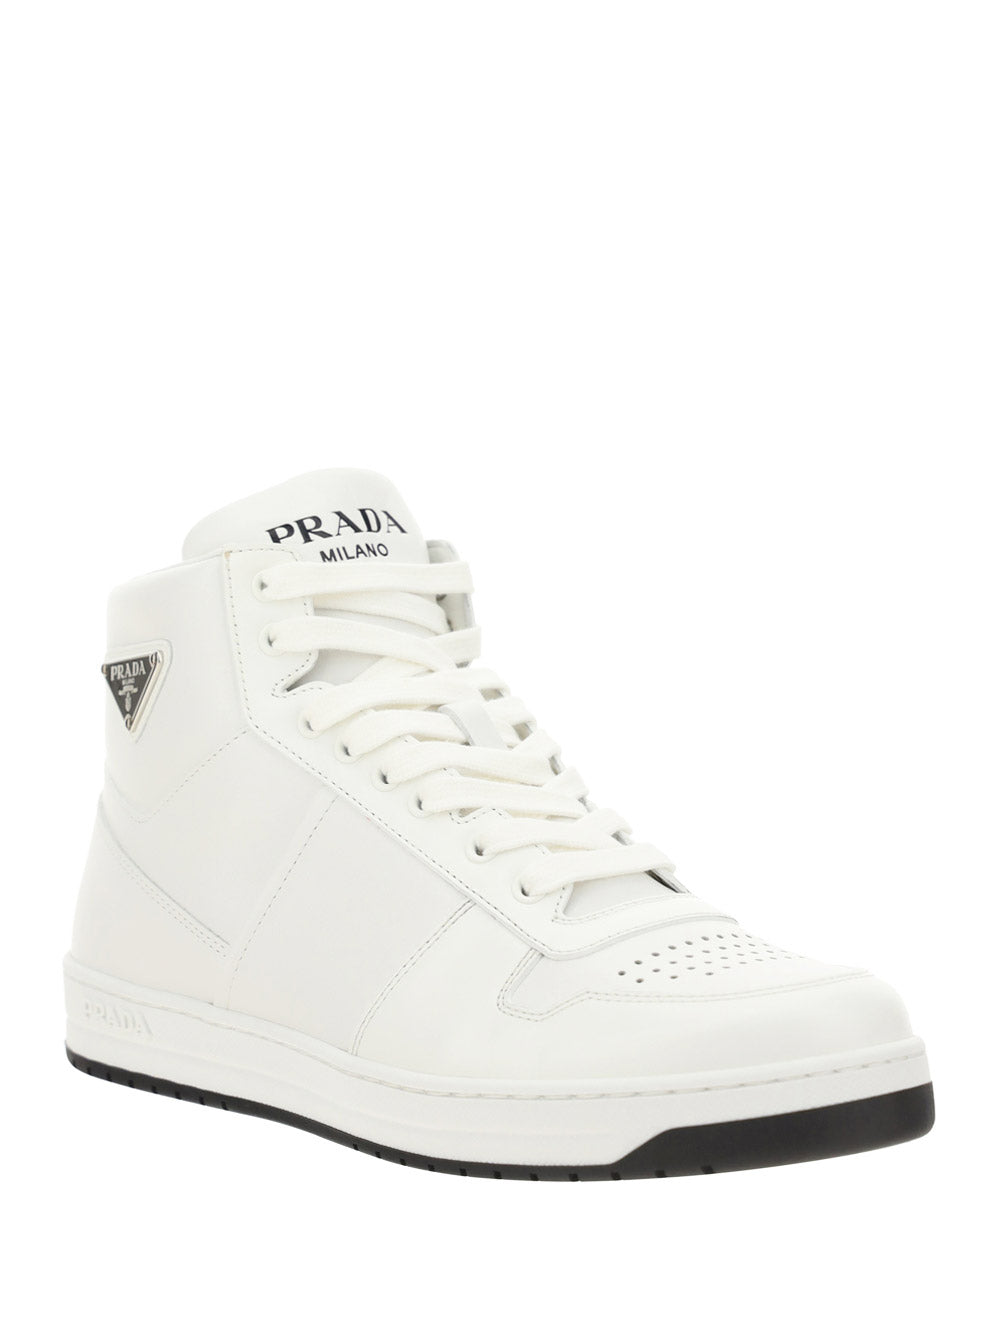 Leather High-Top Sneakers - White